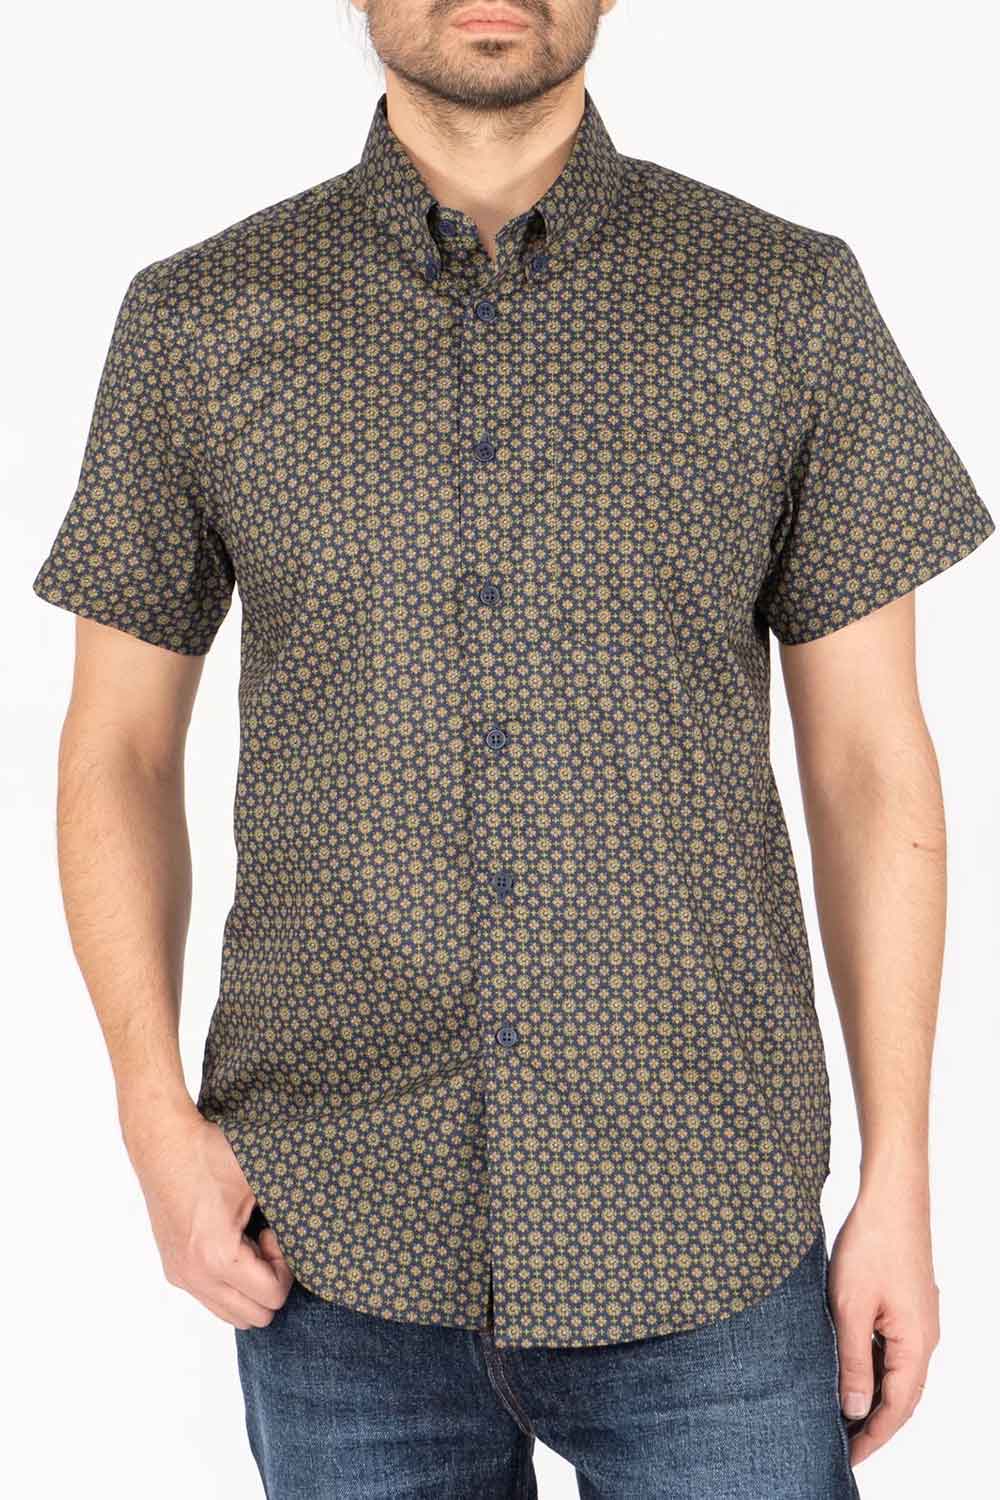 Naked & Famous - SS Easy Shirt - Medallions Print Navy - Front